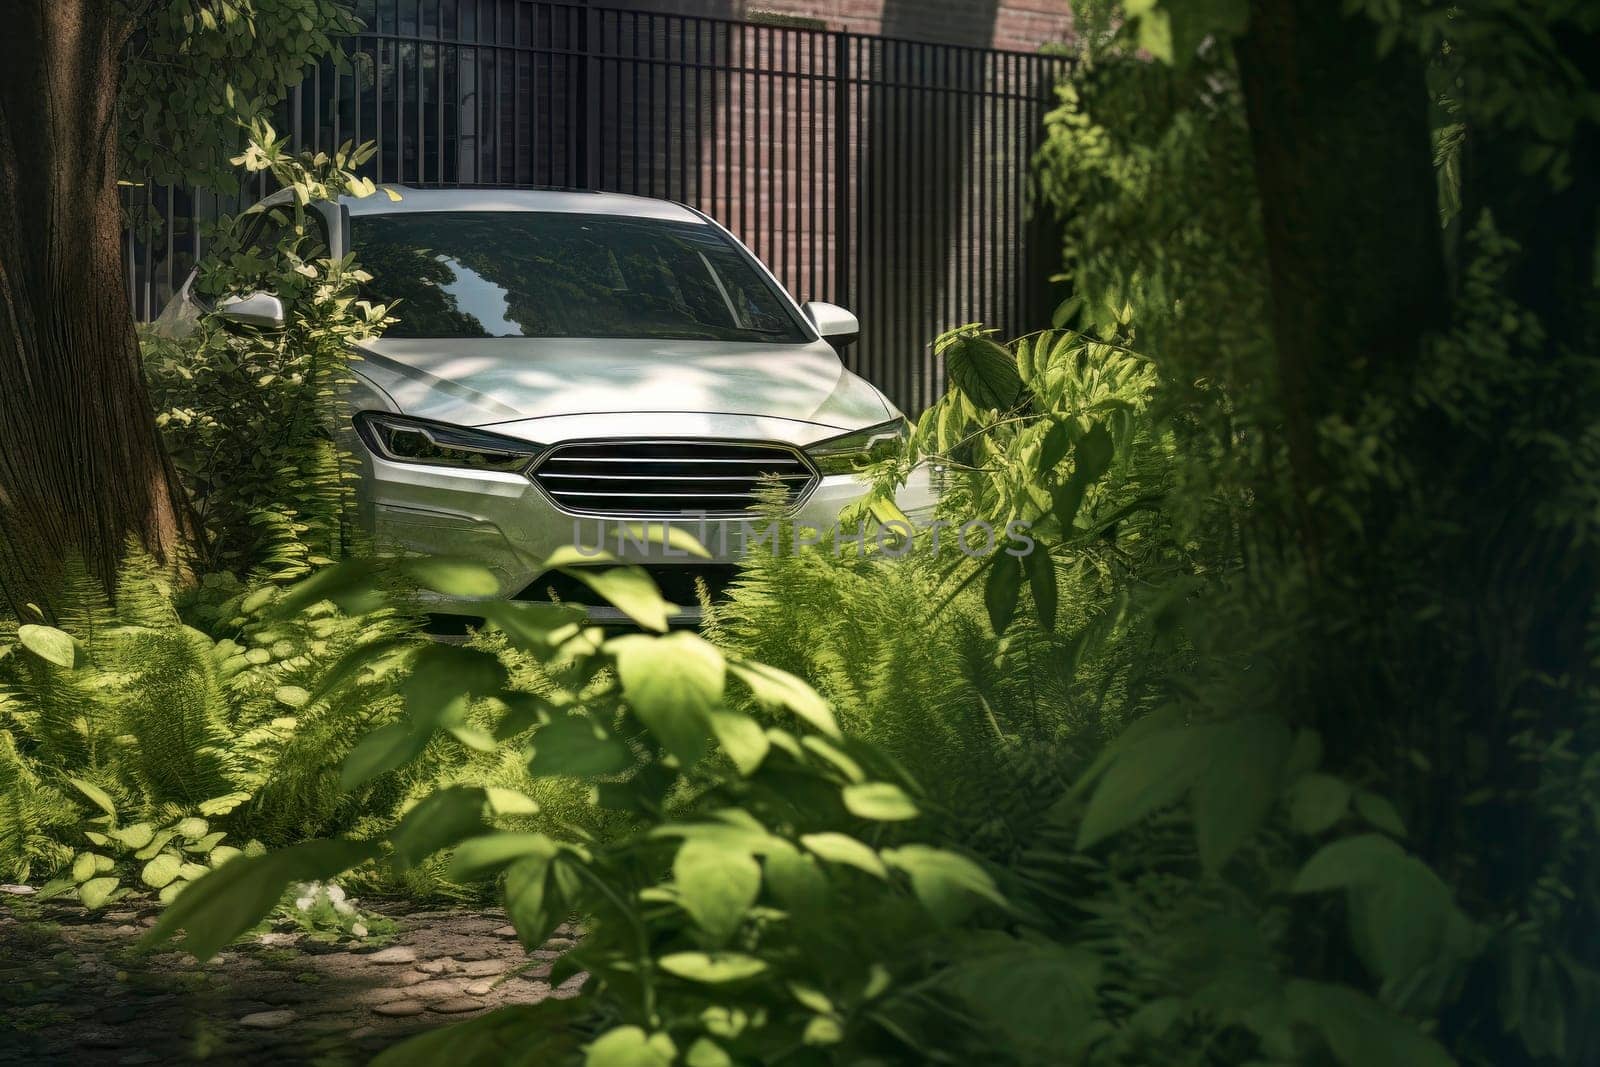 Picture of a car parked serenely among vibrant green foliage.